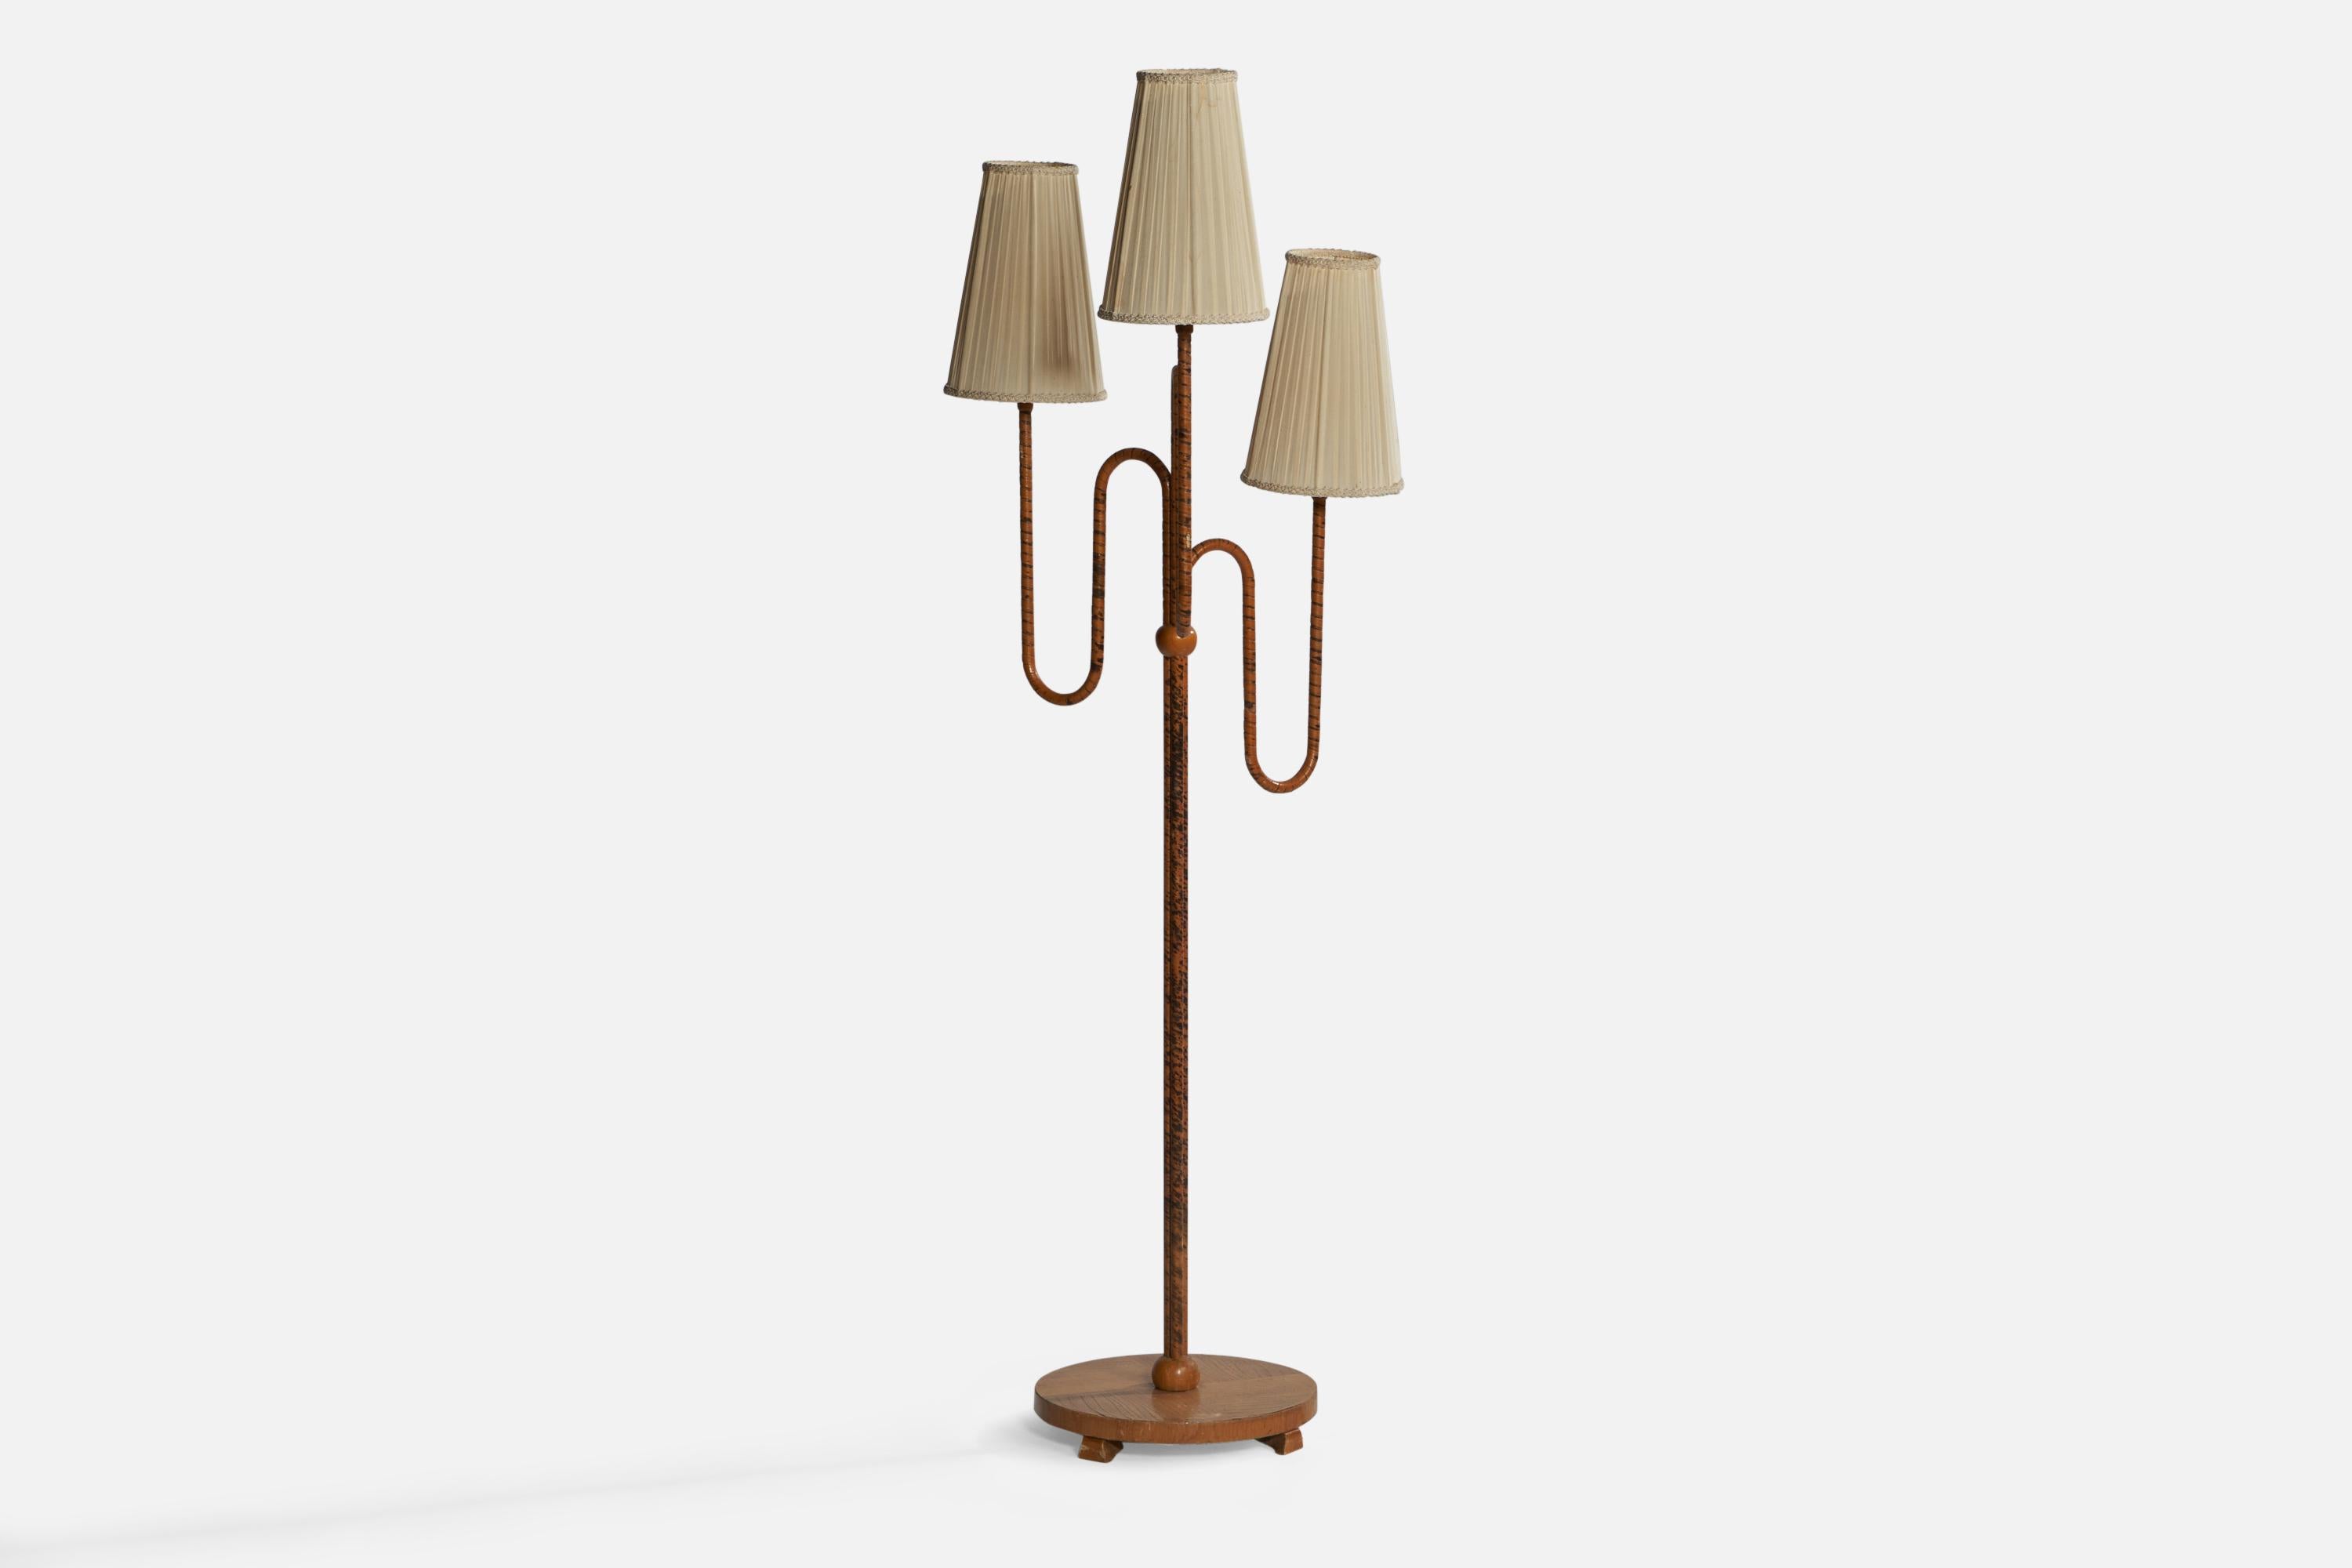 A three-armed elm, brass, off-white fabric and wrapped wood veneer floor lamp designed and produced in Sweden, 1930s.

Overall Dimensions (inches): 61.25” H x 22.5” W x 18.25” D. Stated dimensions include shades.
Dimensions vary based on on light